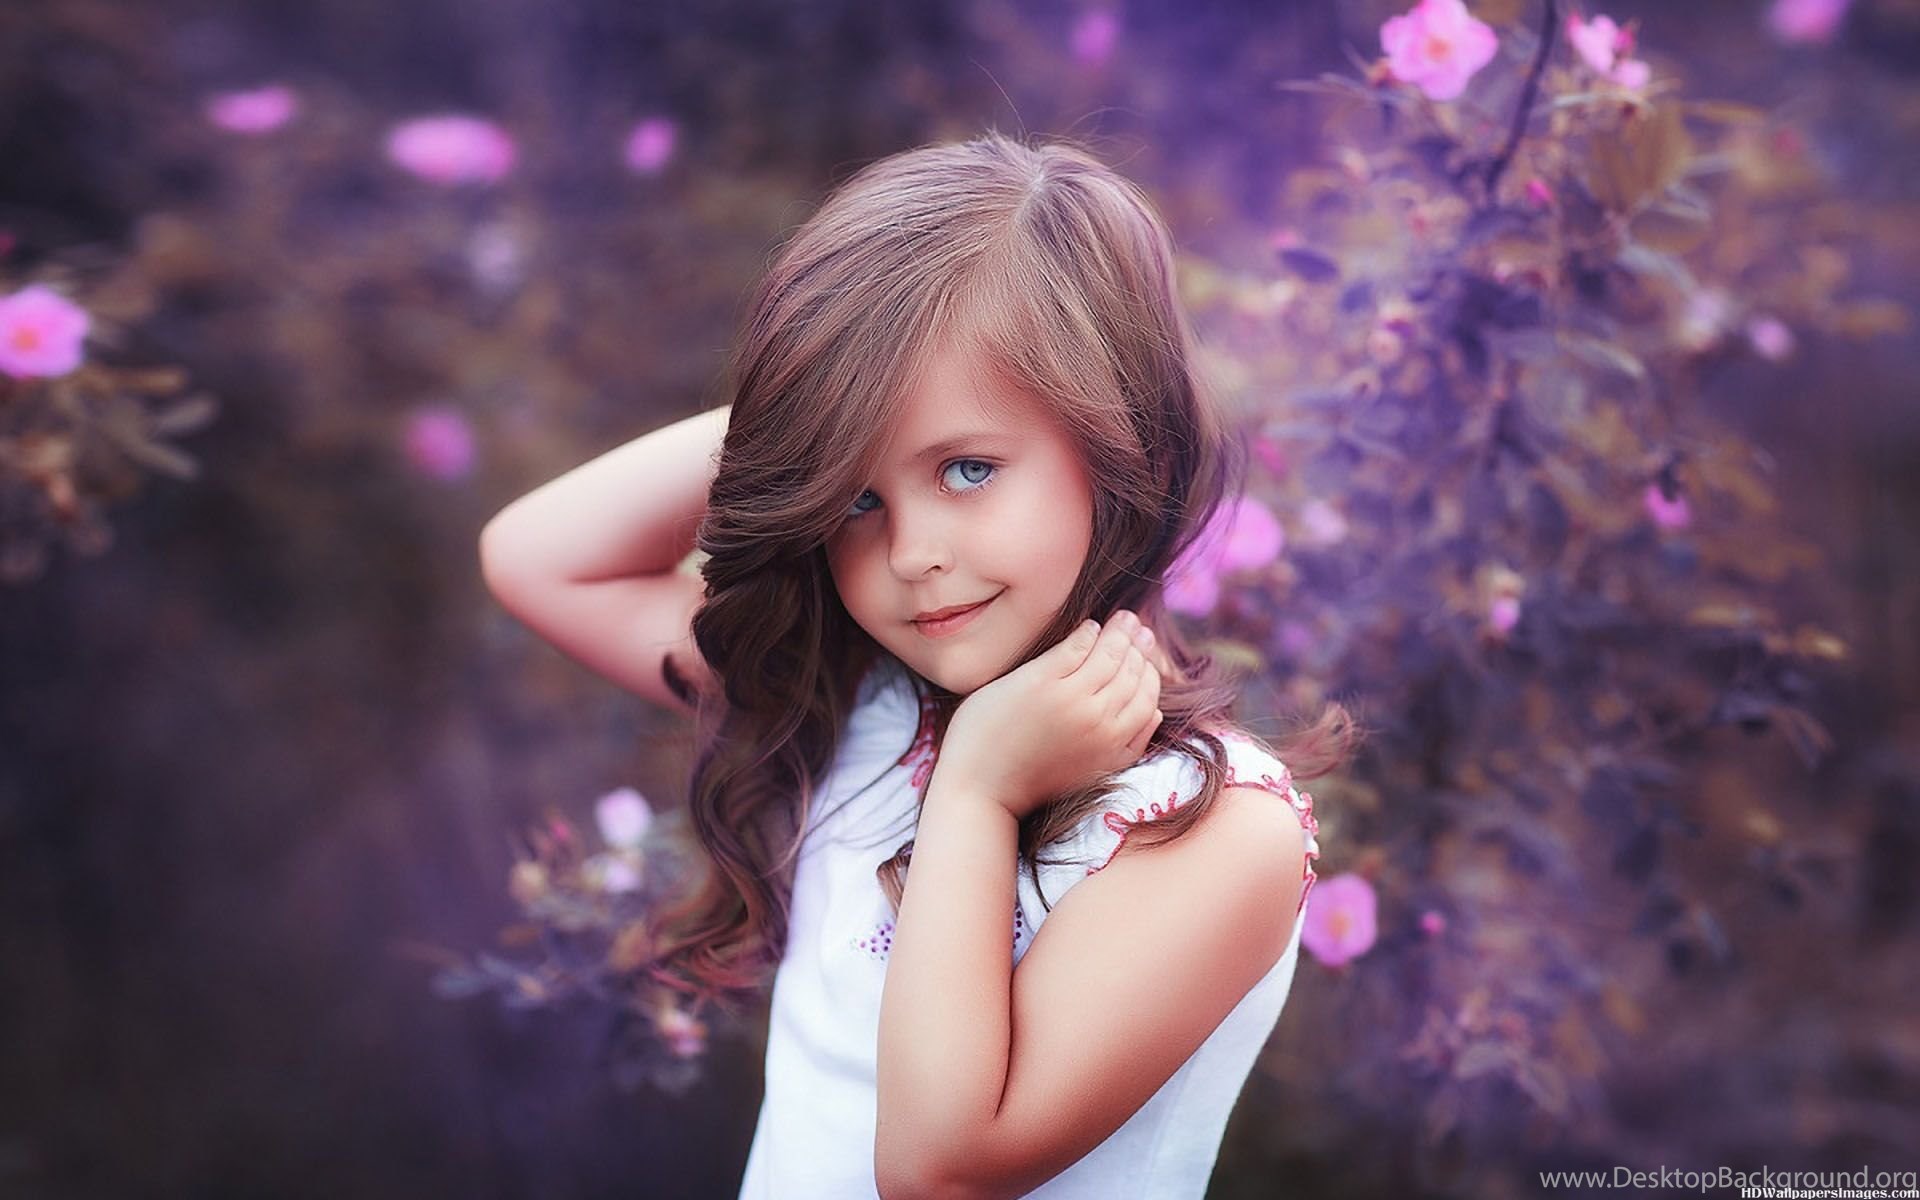 Download Cute Little Baby Girl Beauty Images, Pictures, Photos, HD ... 